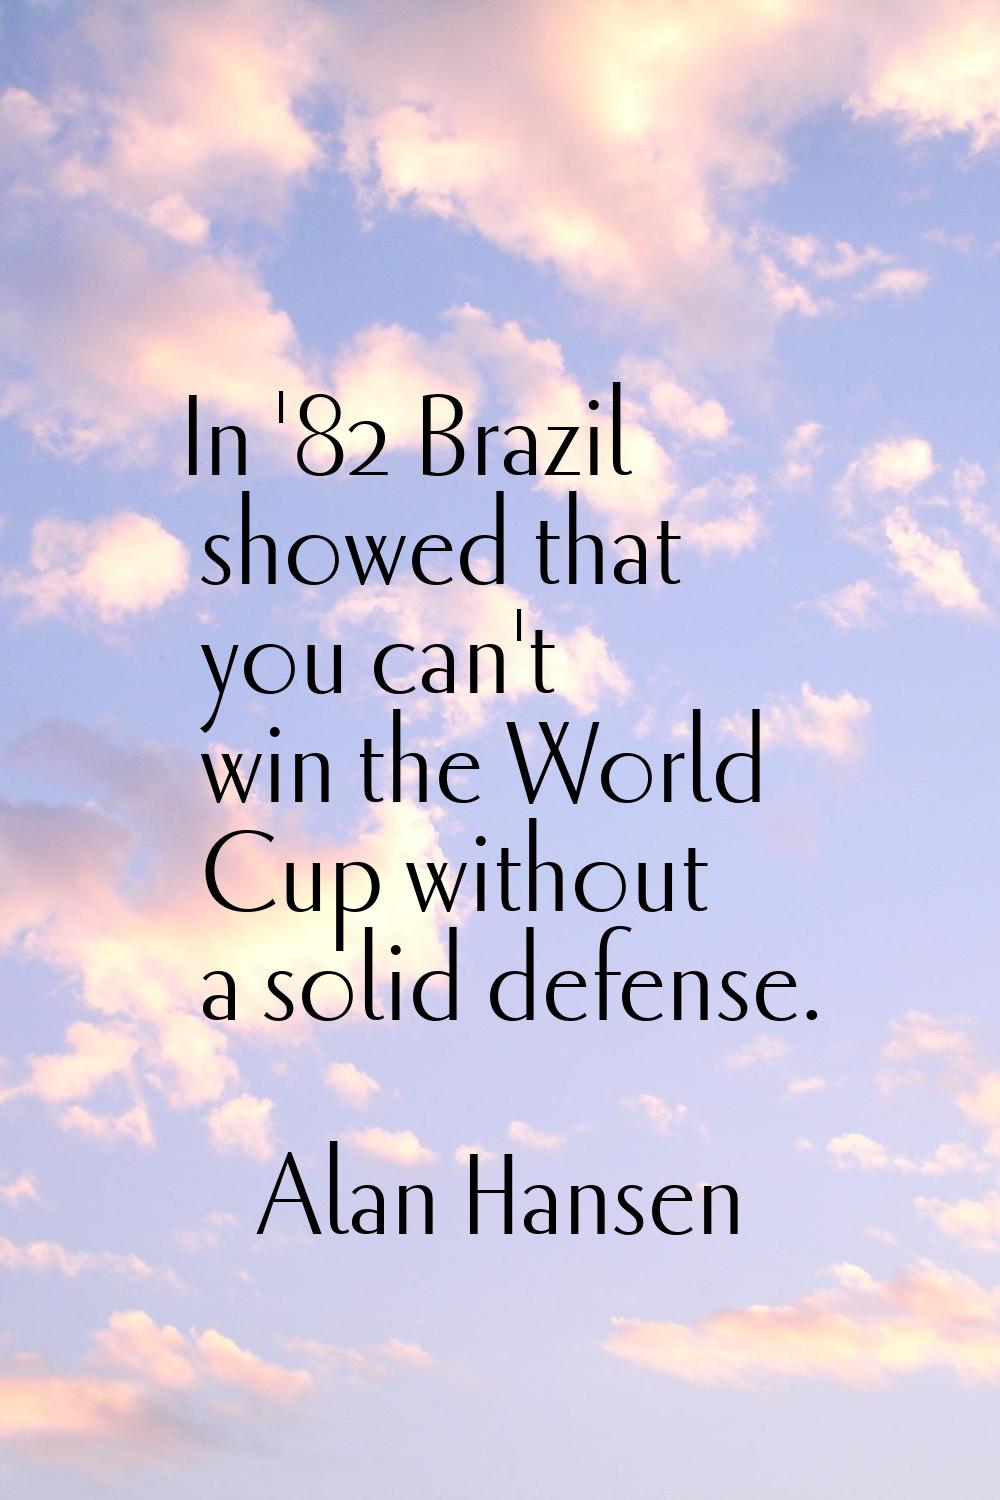 In '82 Brazil showed that you can't win the World Cup without a solid defense.